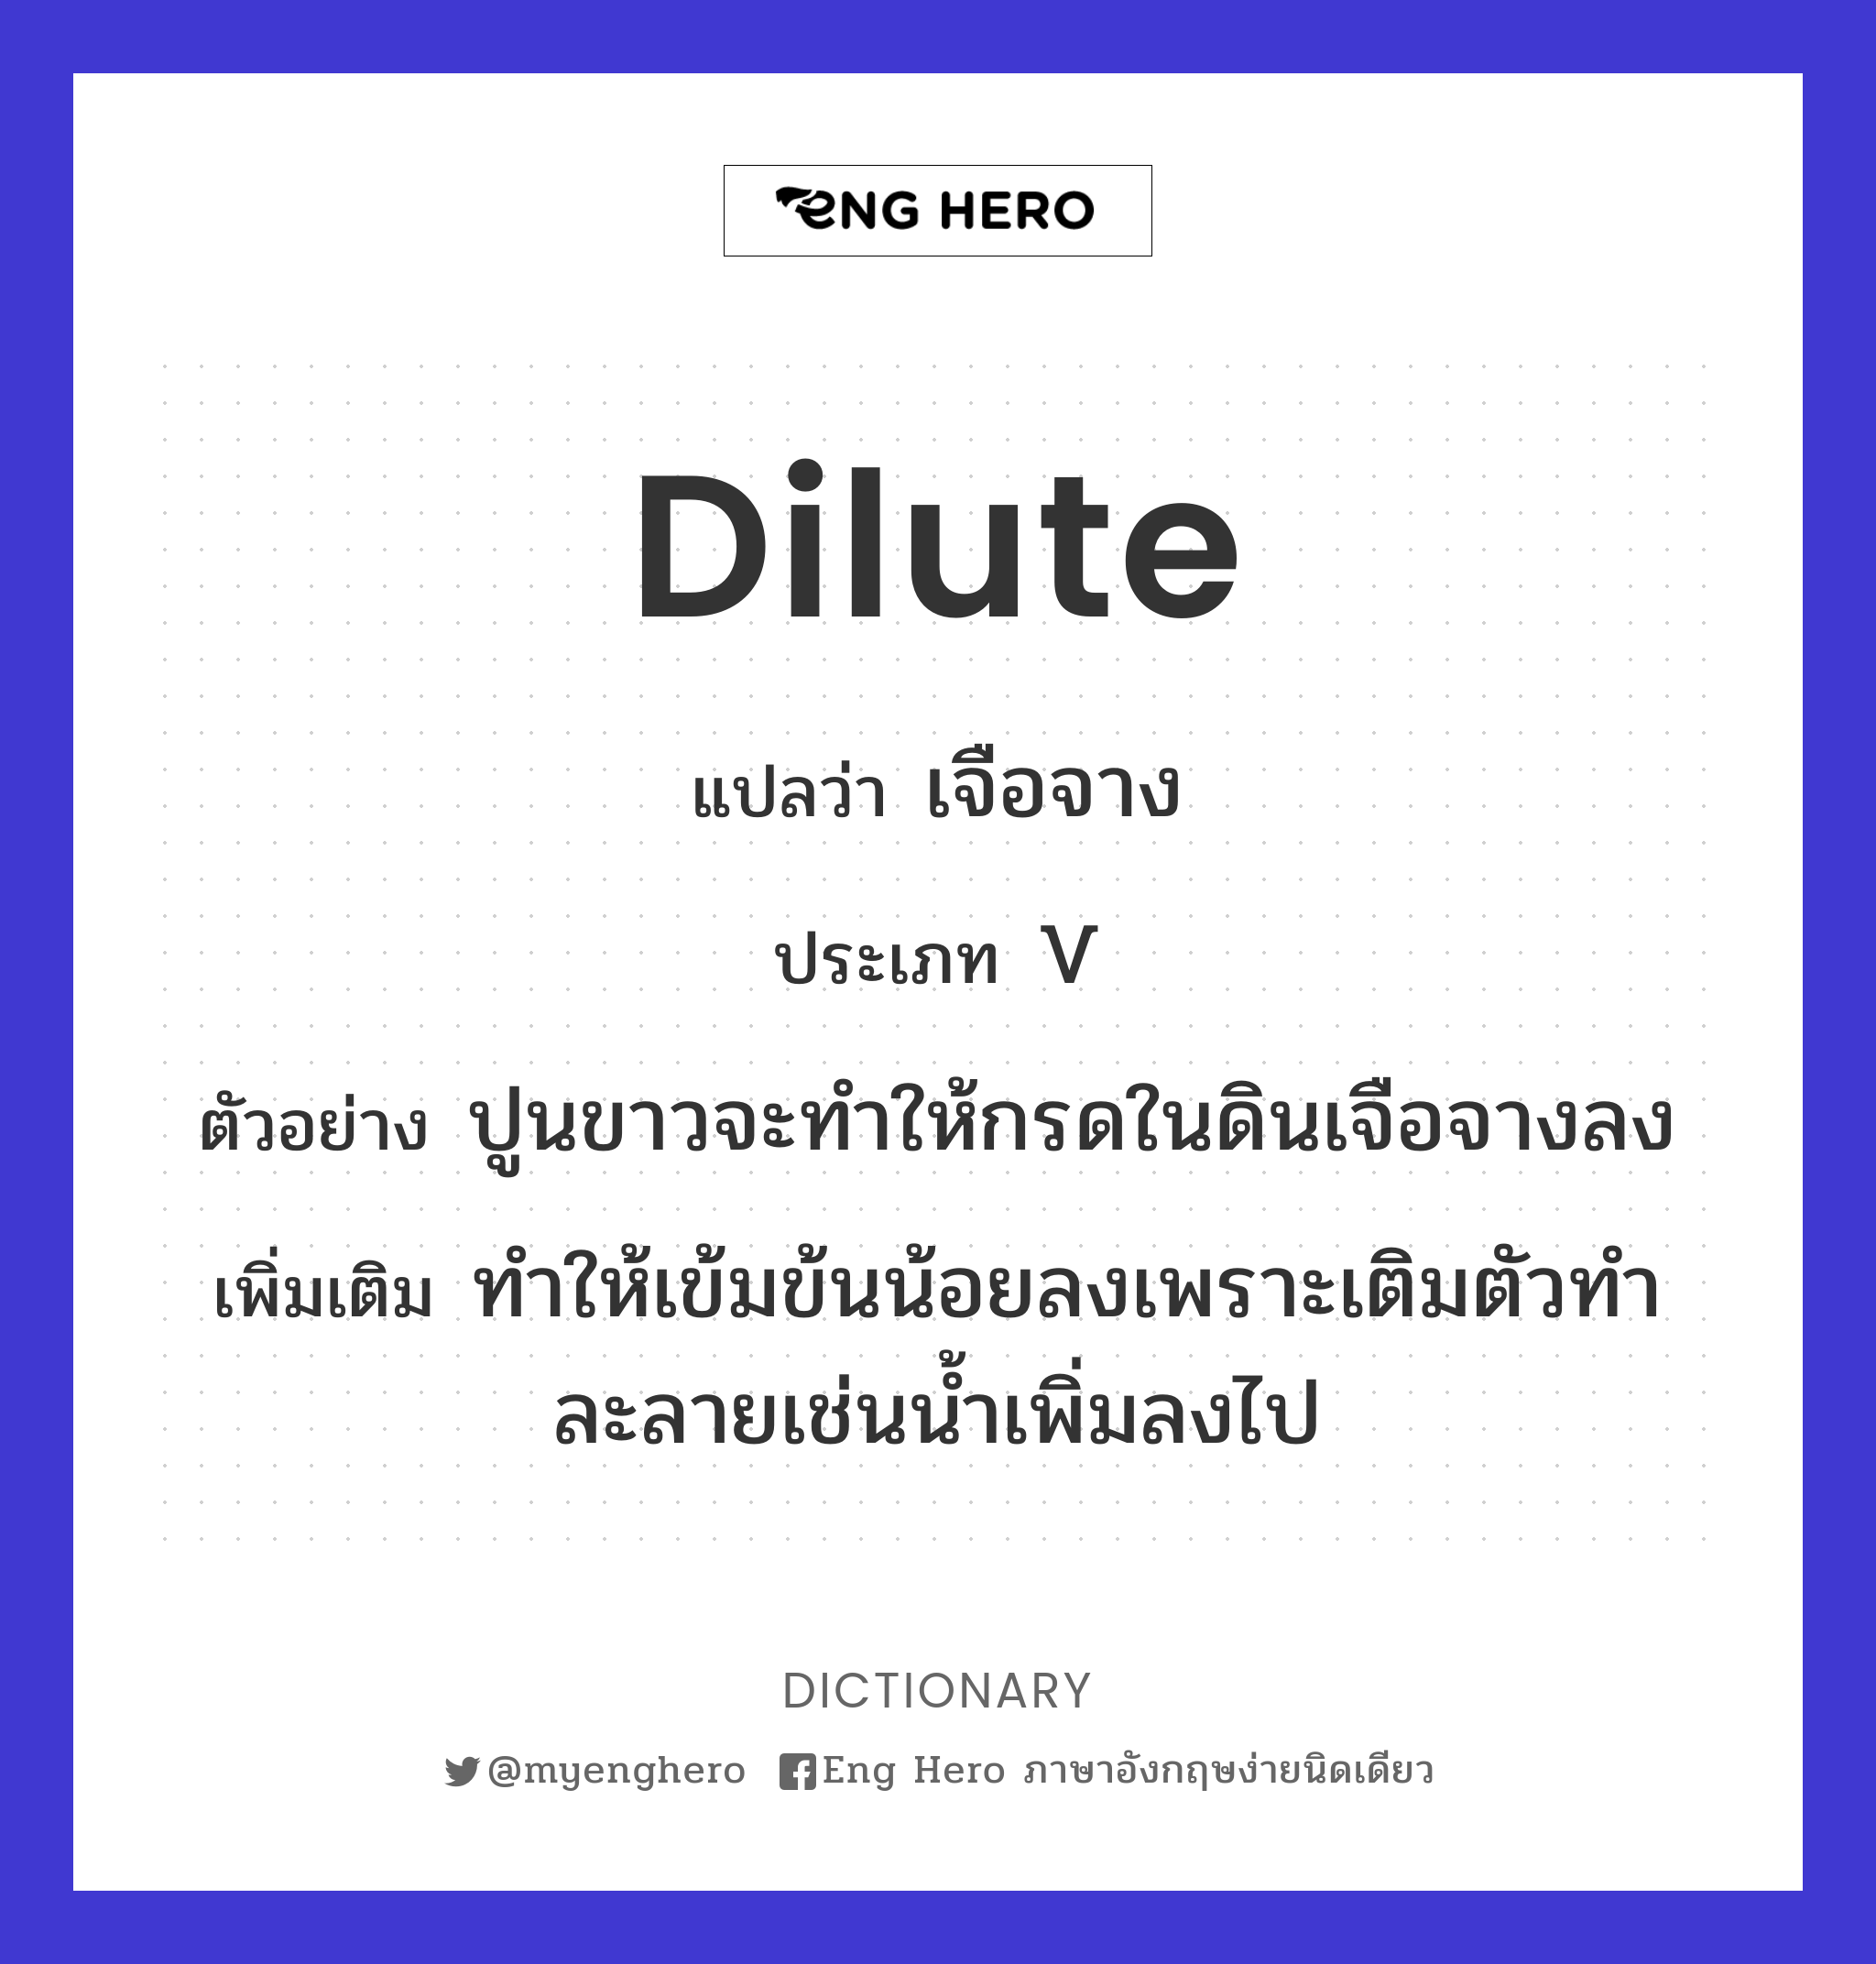 dilute